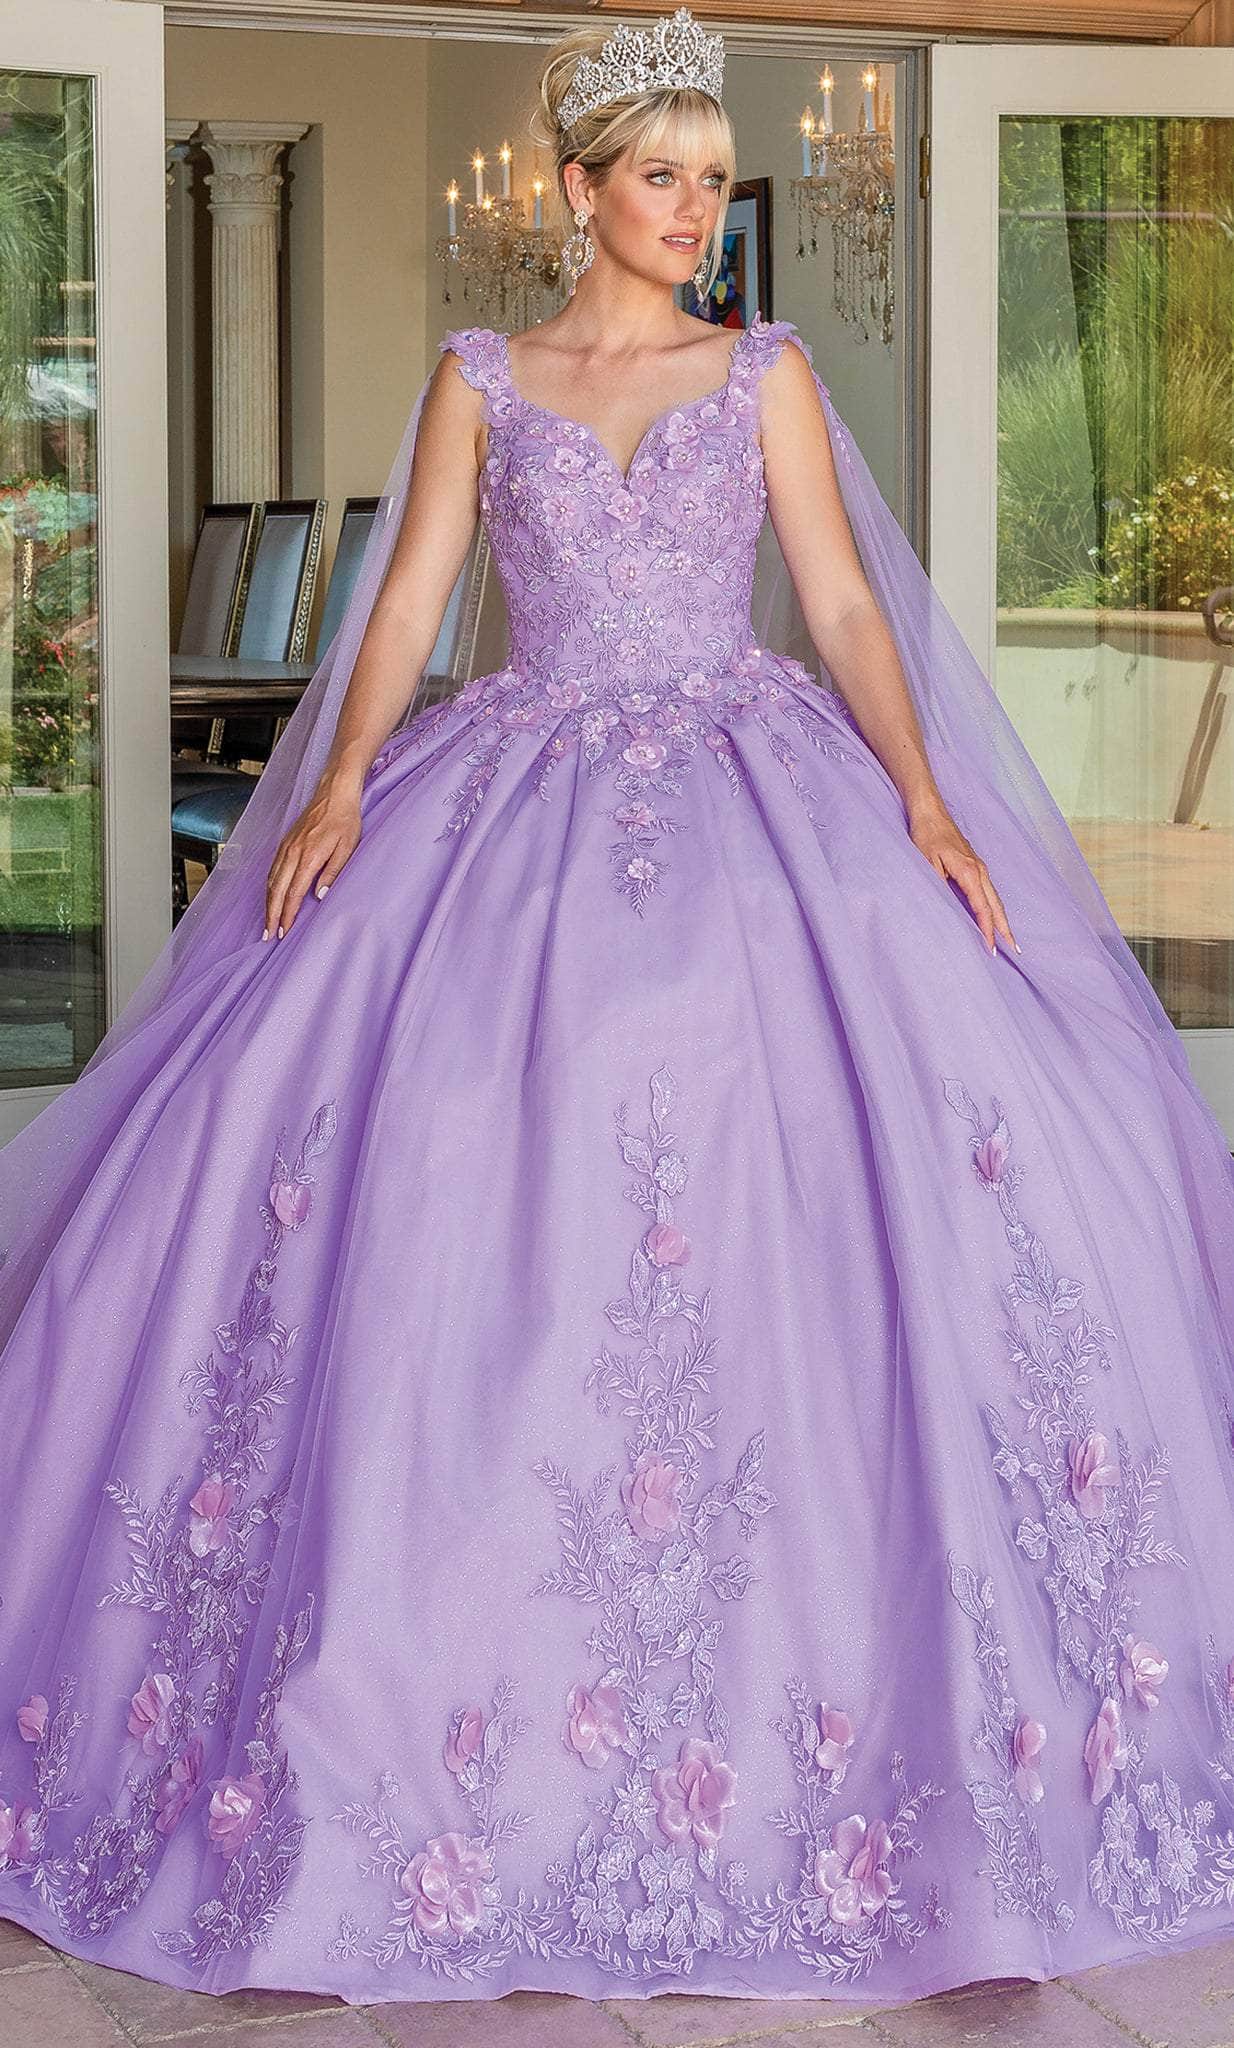 Dancing Queen 1716 - Cape Sleeve Embroidered Ballgown
